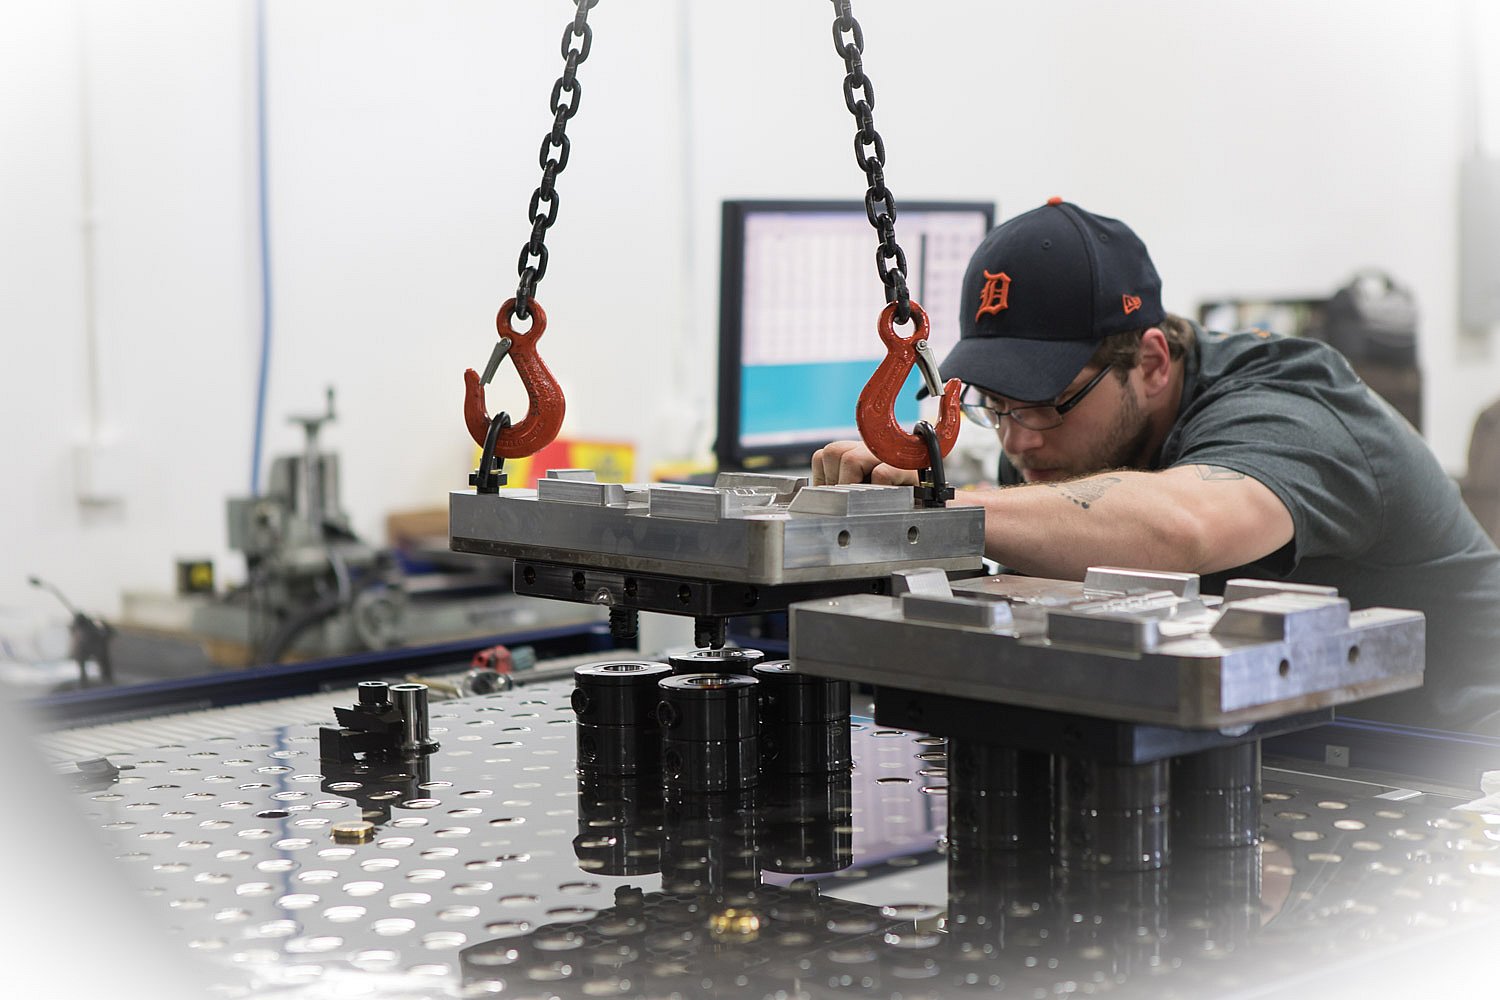 Create work that matters - Now hiring a Journeyman Mold Maker at Herman  Mold + Tooling